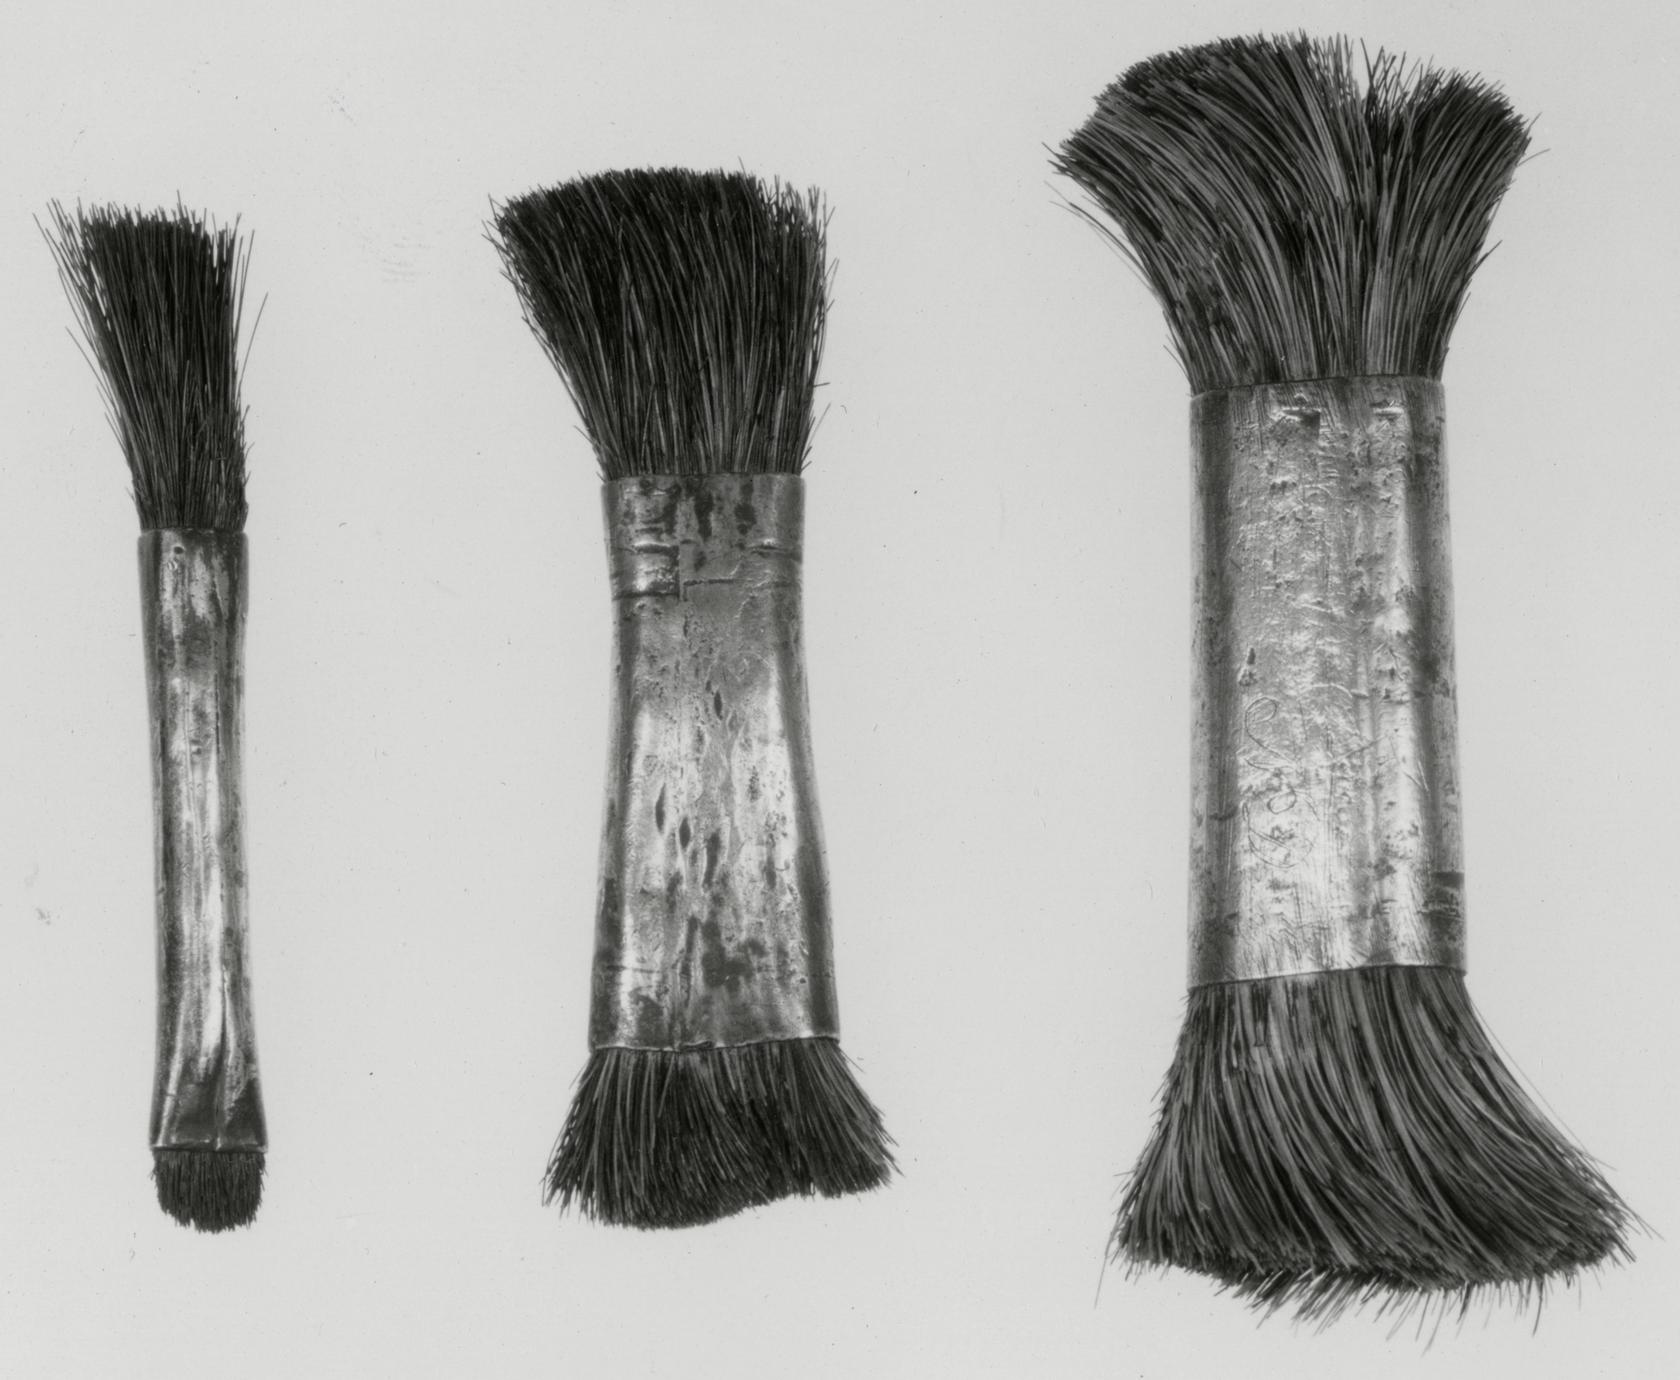 Black and white photograph of various brushes.